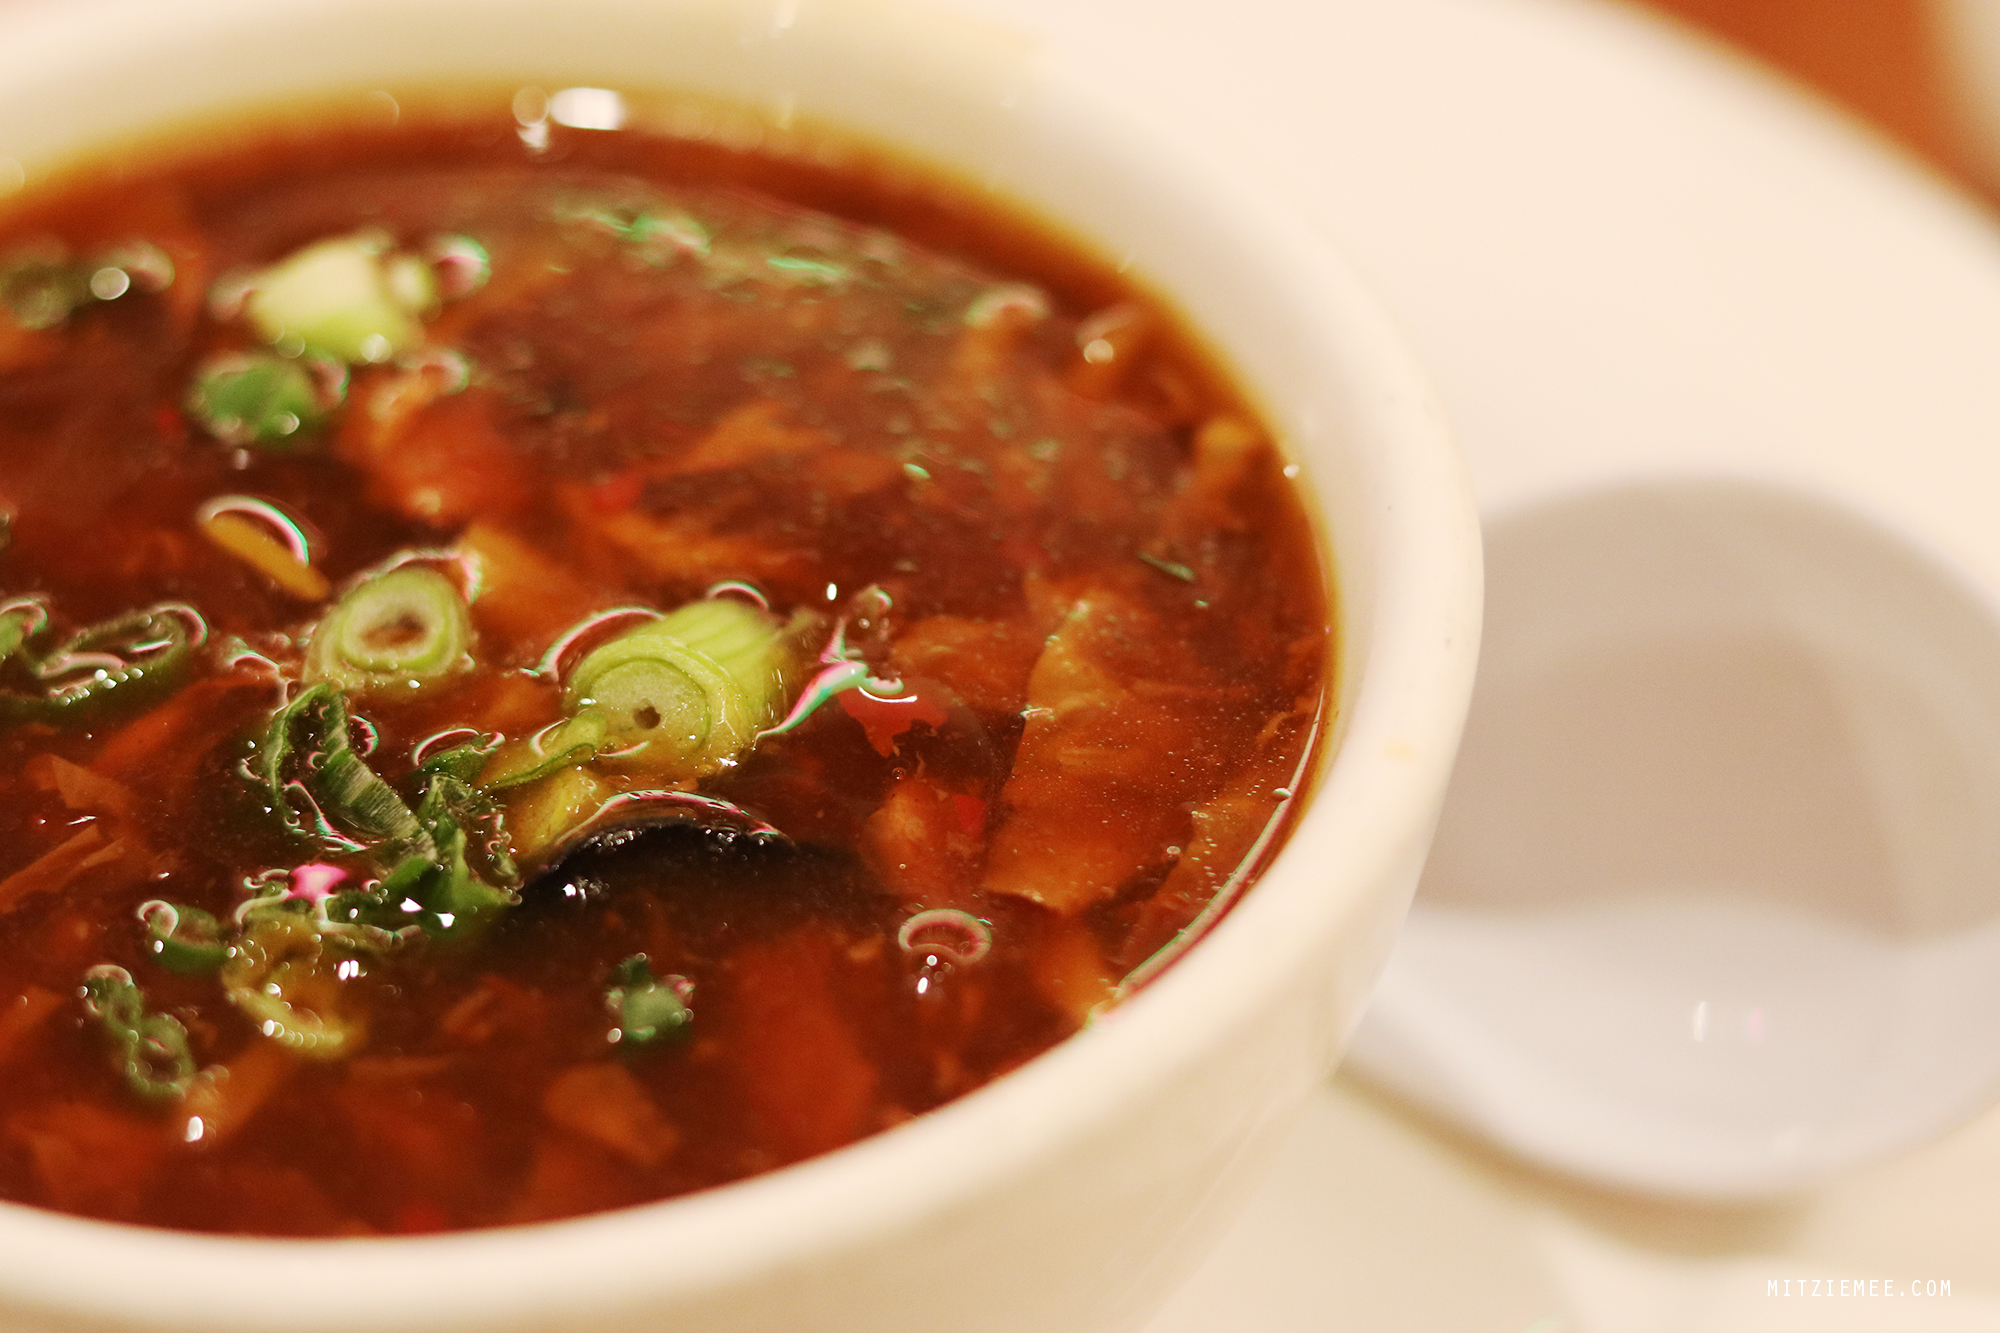 Hot and sour soup at Joe's Shanghai, Chinatown, New York